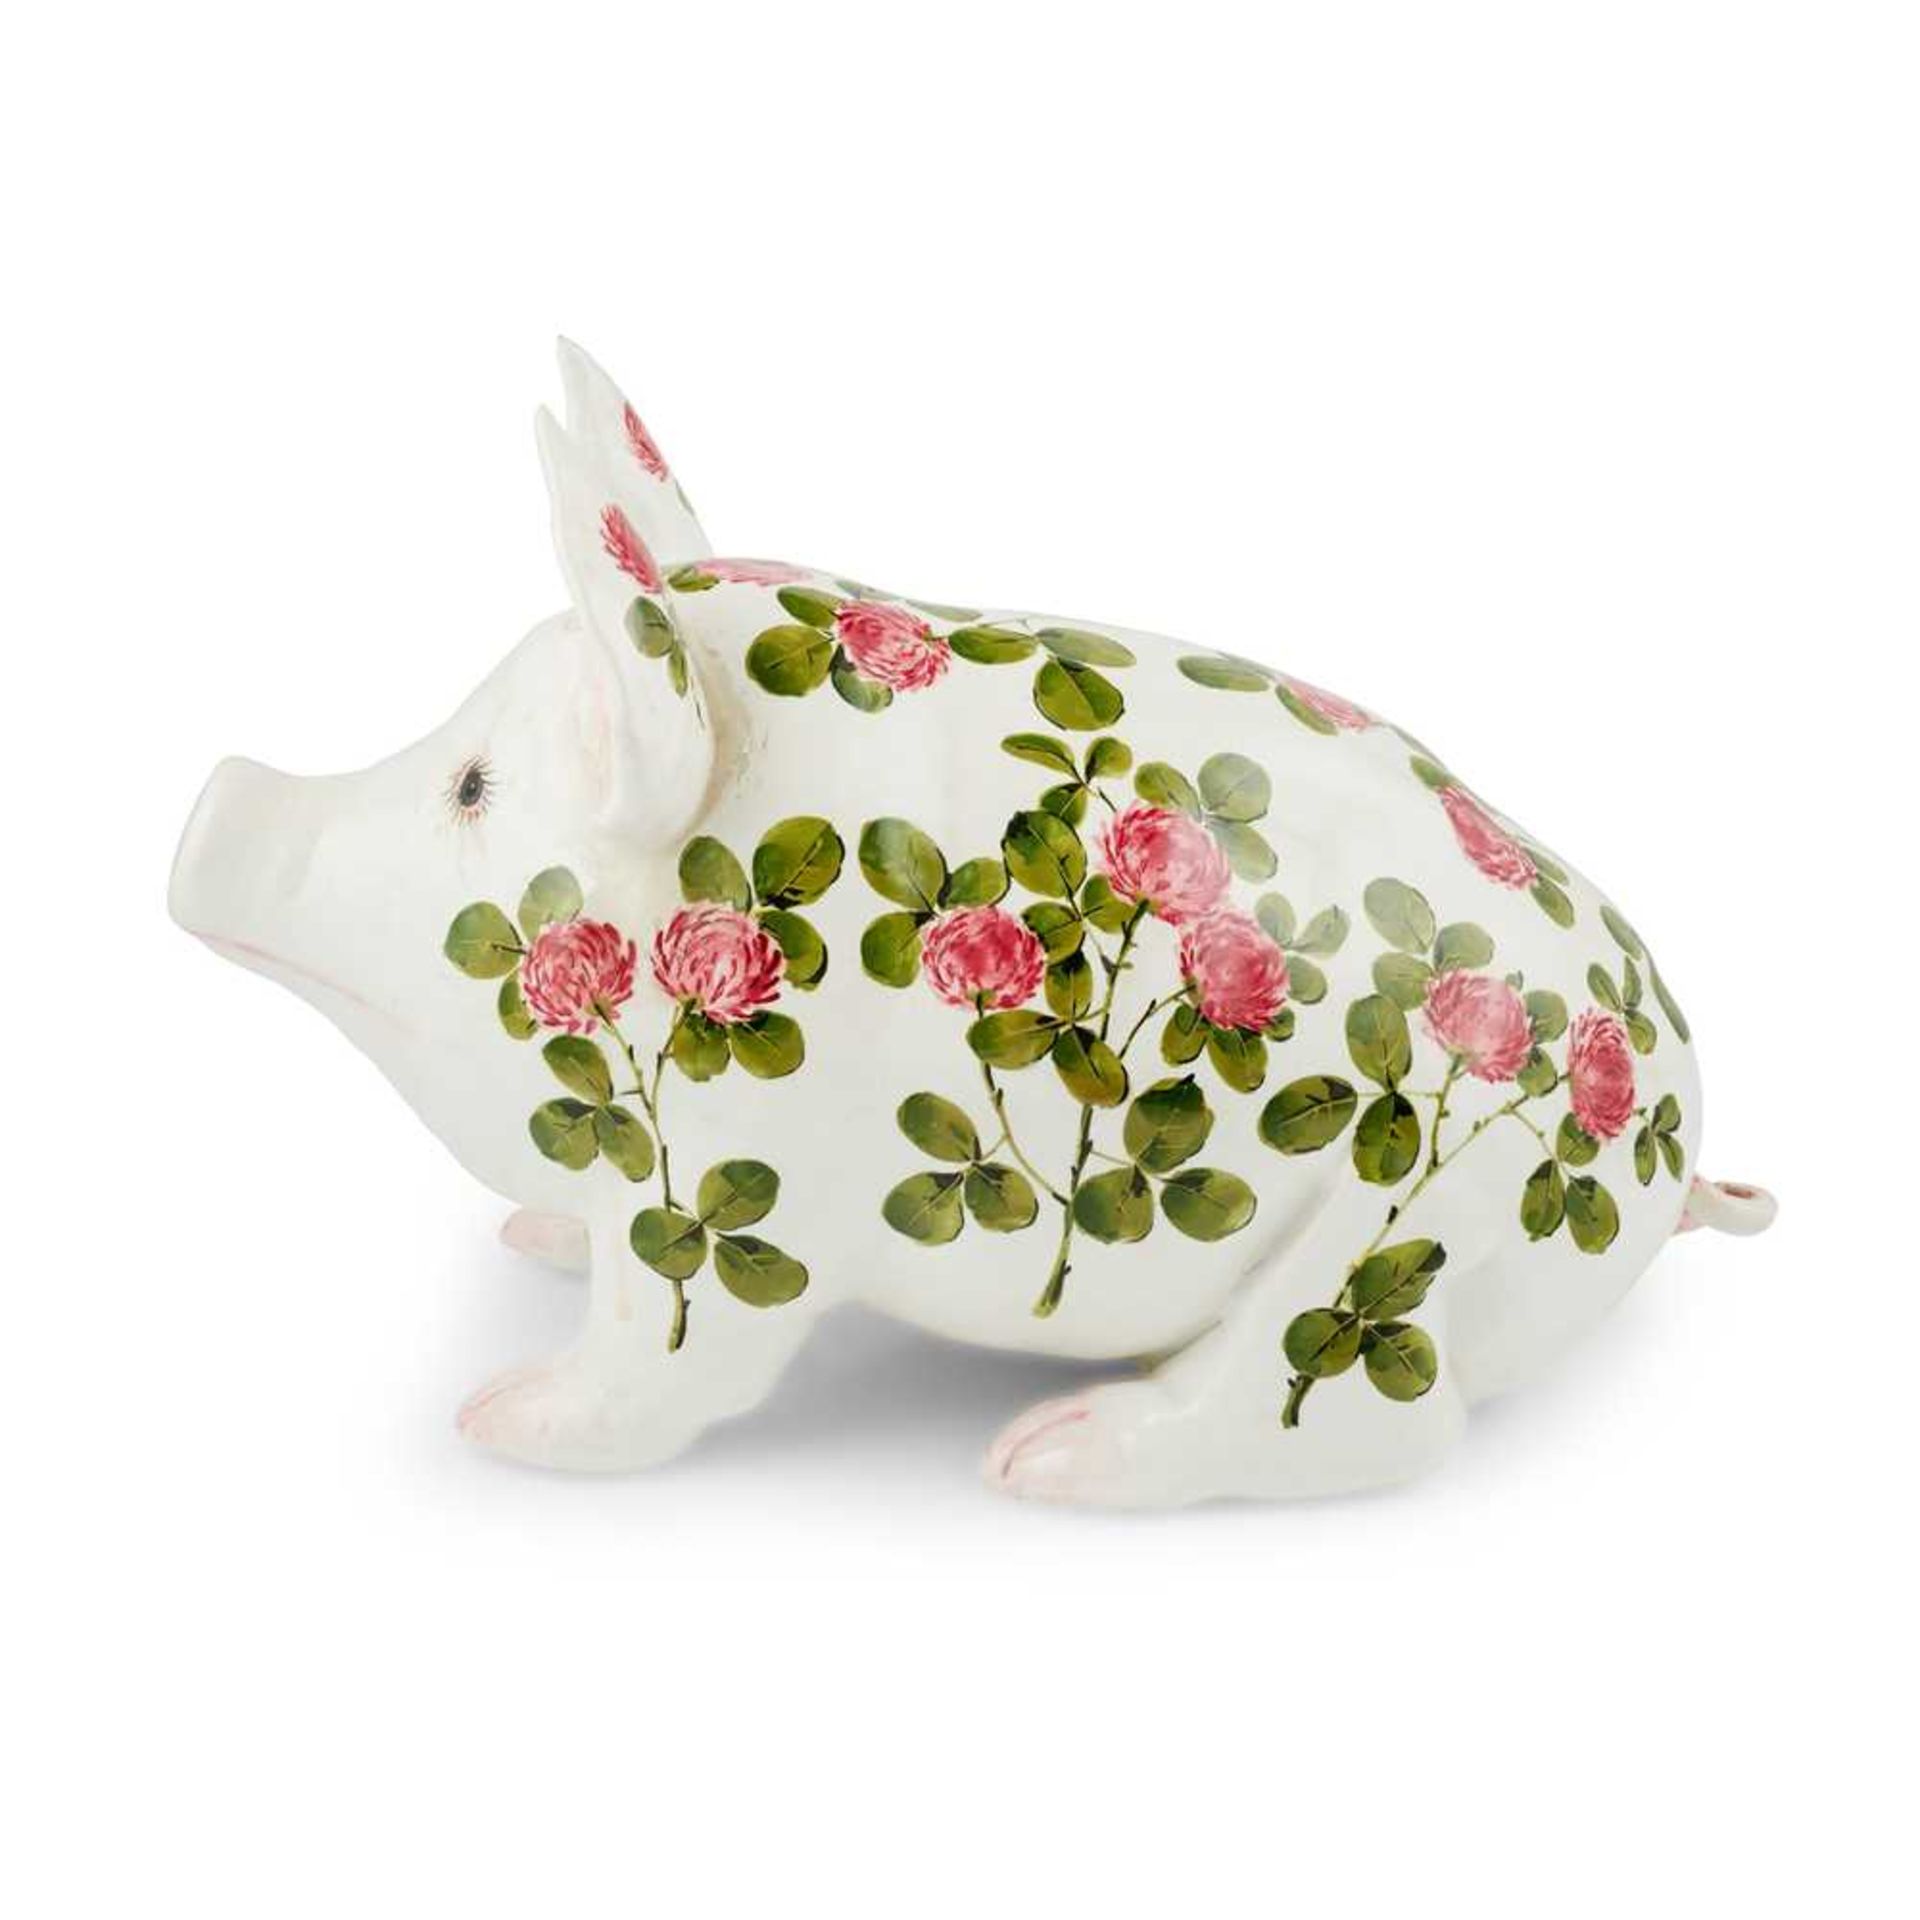 A LARGE WEMYSS WARE PIG 'CLOVER' PATTERN, POST 1930 - Image 3 of 4